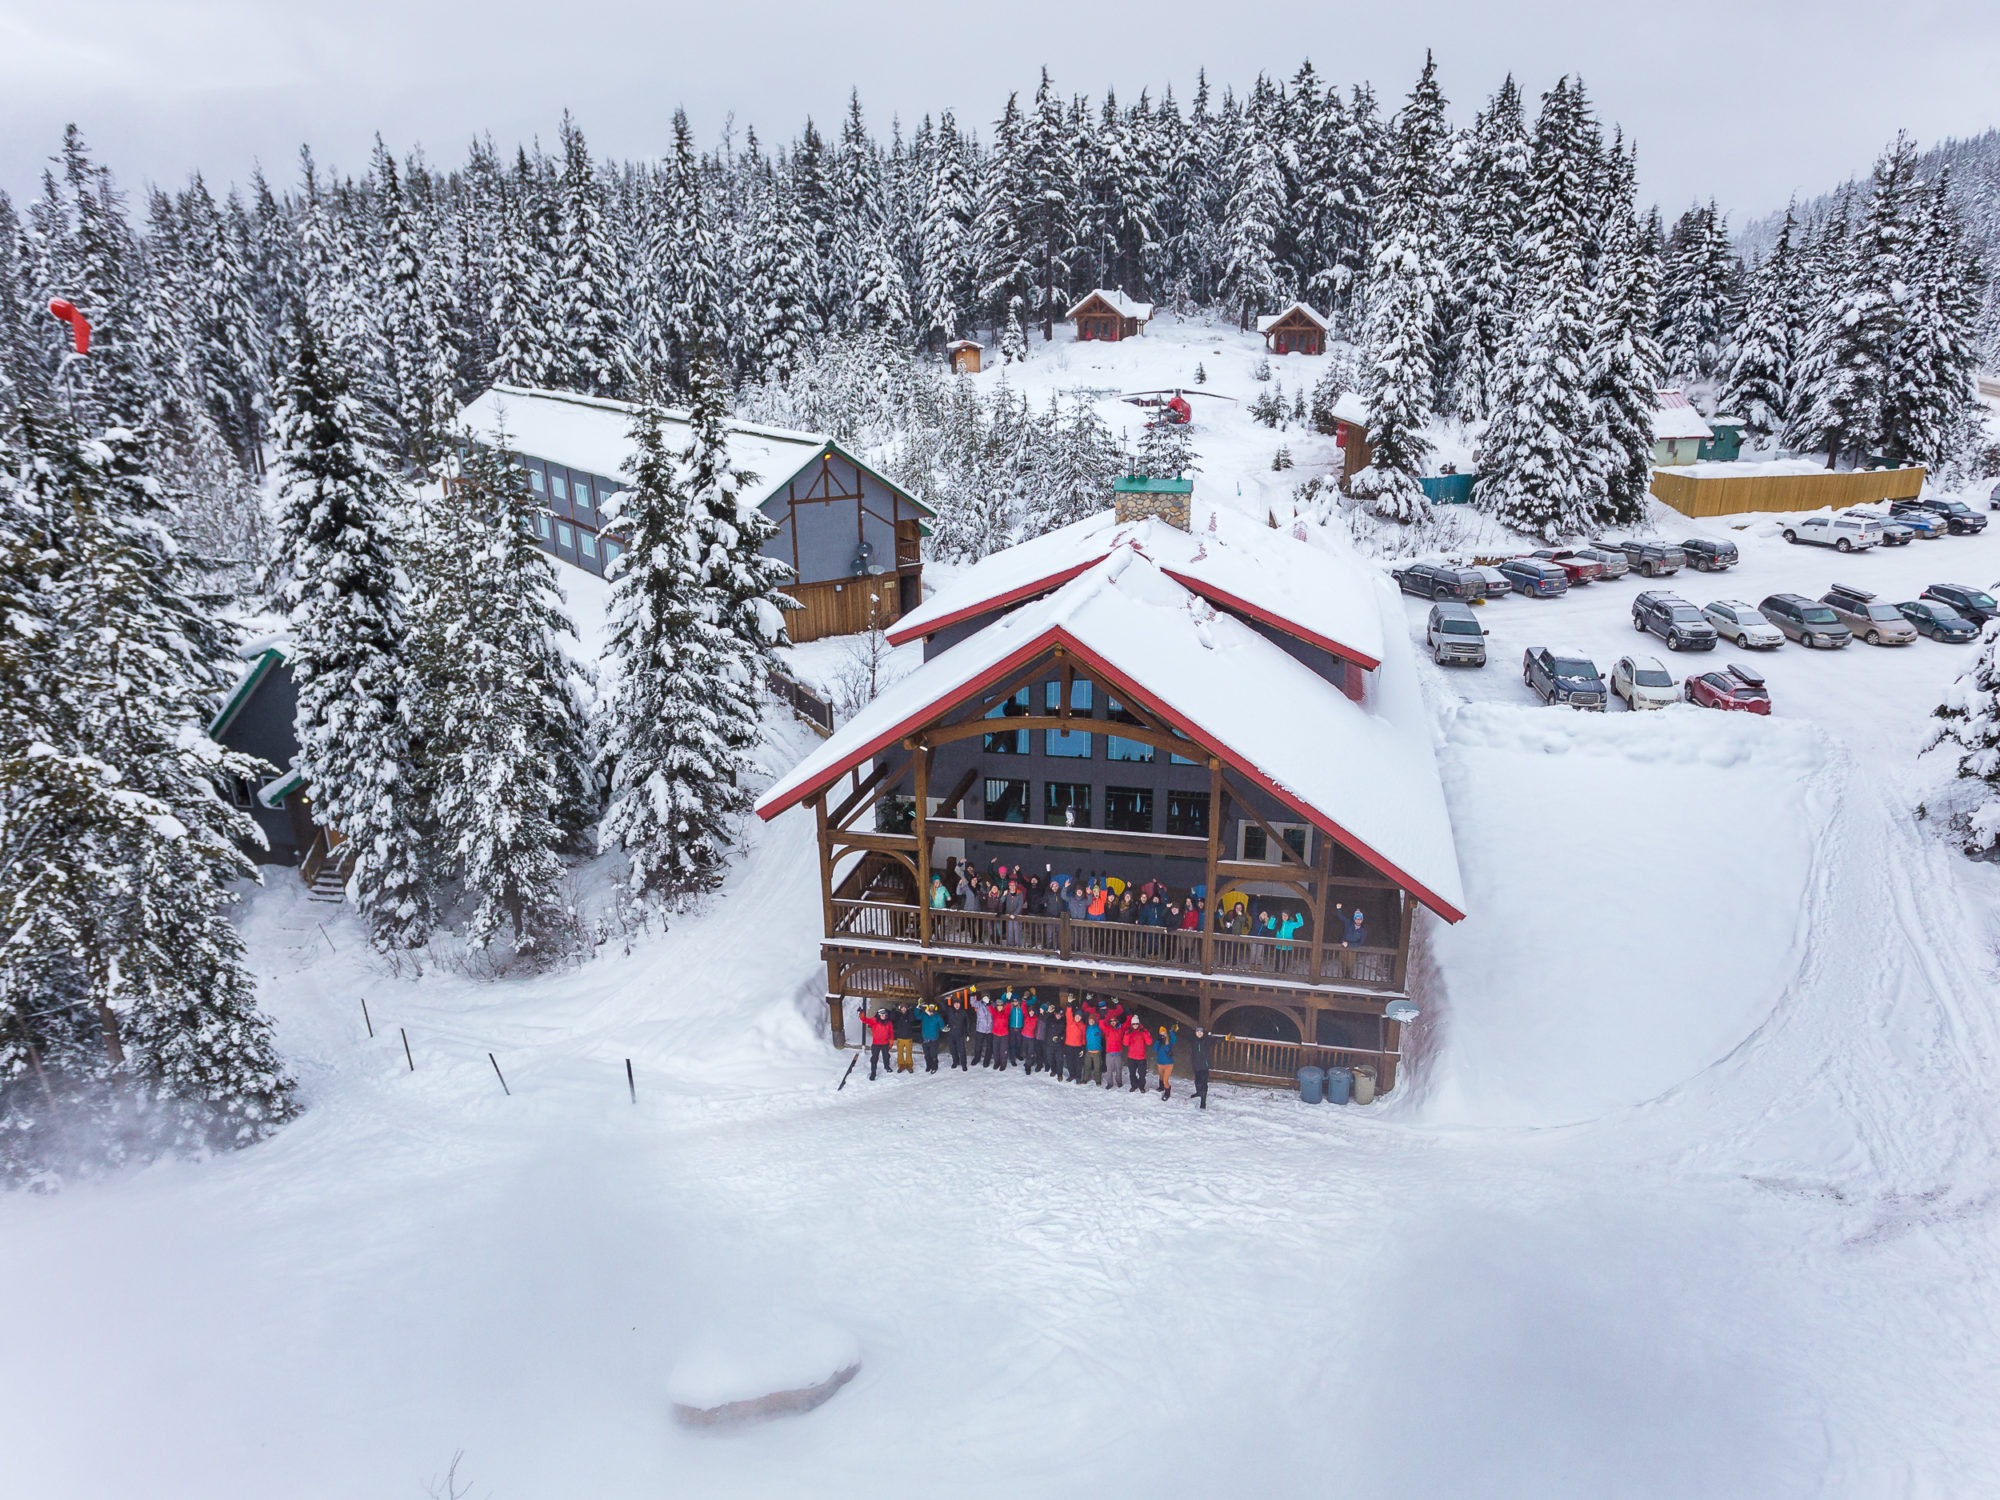 Aerial view of Heather Mountain Lodge with large group of guests waving